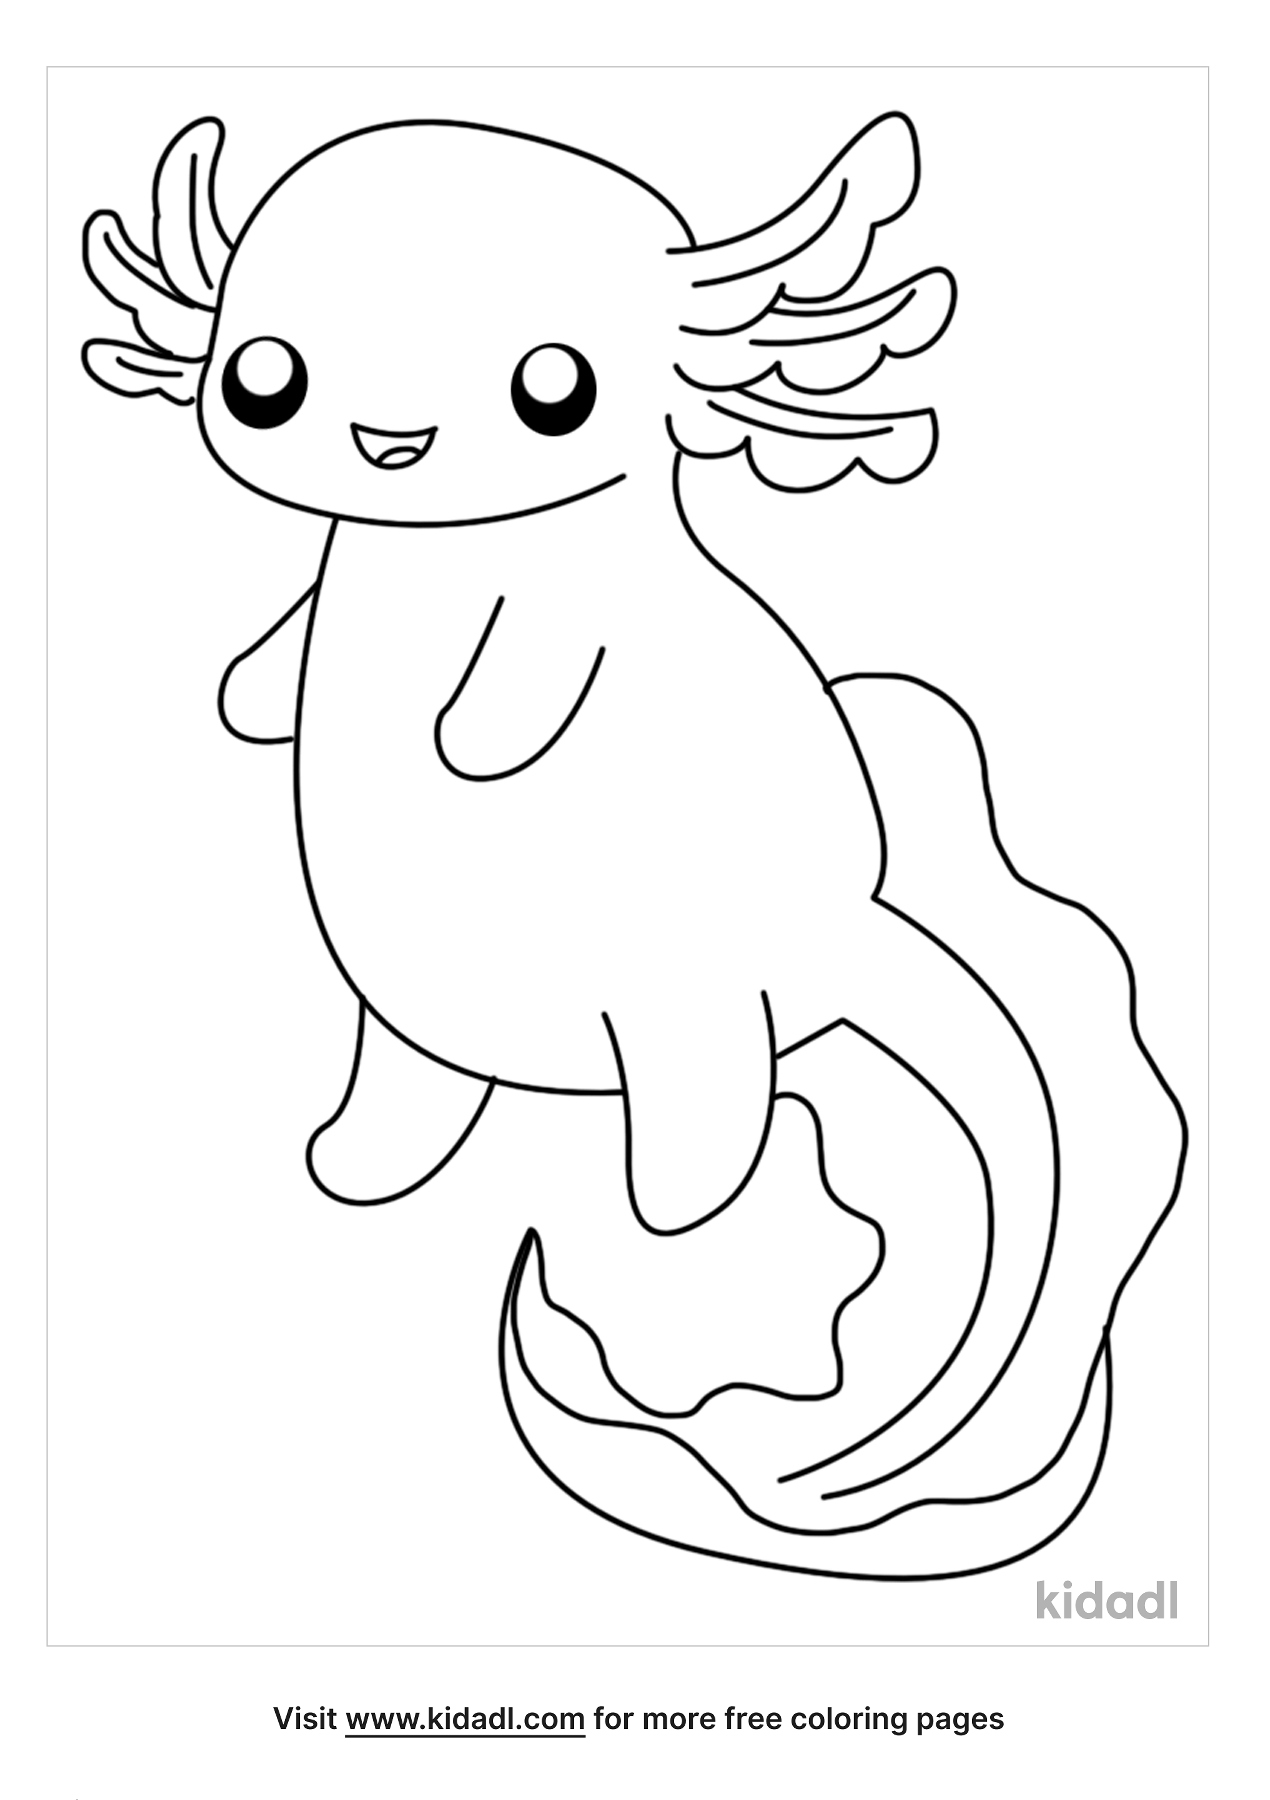 Axolotl Coloring Pages   Coloring Home